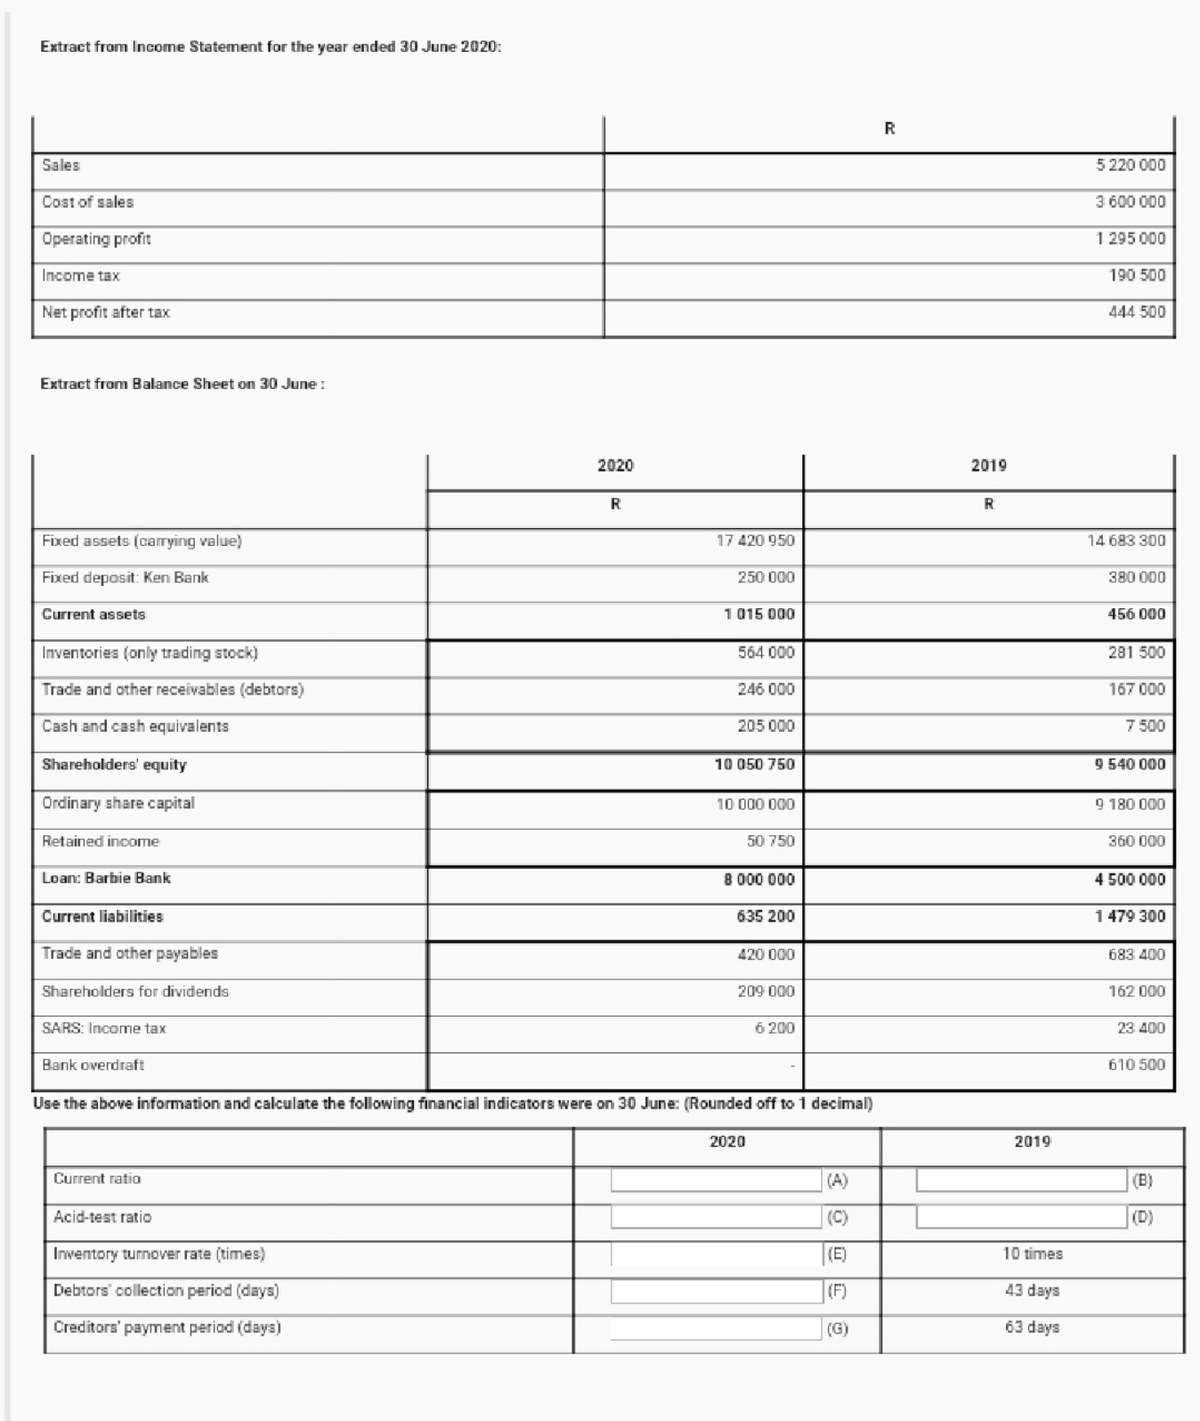 Extract from Income Statement for the year ended 30 June 2020:
R
Sales
5 220 000
Cost of sales
3 600 000
Operating profit
1 295 000
Income tax
190 500
Net profit after tax
444 500
Extract from Balance Sheet on 30 June :
2020
2019
R
Fixed assets (carrying value)
17 420 950
14 683 300
Fixed deposit: Ken Bank
250 000
380 000
Current assets
1 015 000
456 000
Inventories (only trading stock)
564 000
281 500
Trade and other receivables (debtors)
246 000
167 000
Cash and cash equivalents
205 000
7 500
Shareholders' equity
10 050 750
9 540 000
Ordinary share capital
10 000 000
9 180 000
Retained income
50 750
360 000
Loan: Barbie Bank
8 000 000
4 500 000
Current liabilities
635 200
1479 300
Trade and other payables
420 000
683 400
Shareholders for dividends
209 000
162 000
SARS: Income tax
6 200
23 400
Bank overdraft
610 500
Use the above information and calculate the following financial indicators were on 30 June: (Rounded off to 1 decimal)
2020
2019
Current ratio
(A)
(B)
Acid-test ratio
(C)
(D)
Inventory turnover rate (times)
(E)
10 times
Debtors' collection period (days)
(F)
43 days
Creditors' payment period (days)
(G)
63 days
